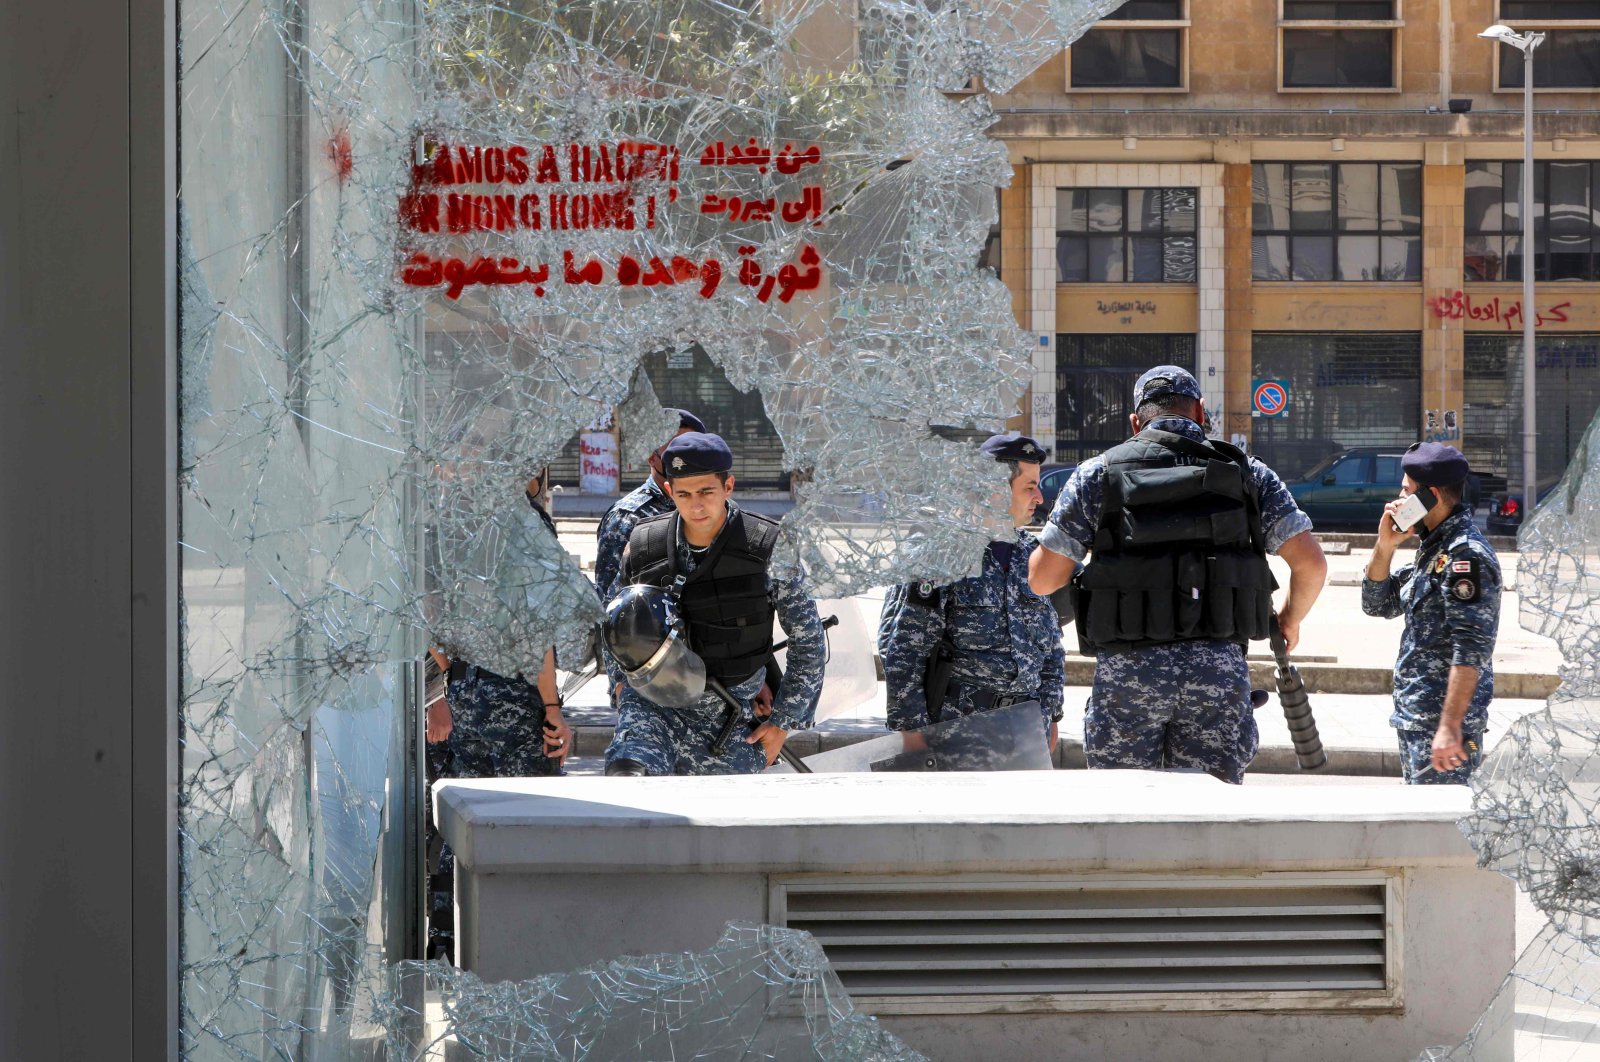 Members of the Lebanese security forces are seen through a broken store window in the downtown area of the capital Beirut, during an anti-government demonstration marking International Workers' Day (Labour Day), on May 1, 2020. (AFP Photo)